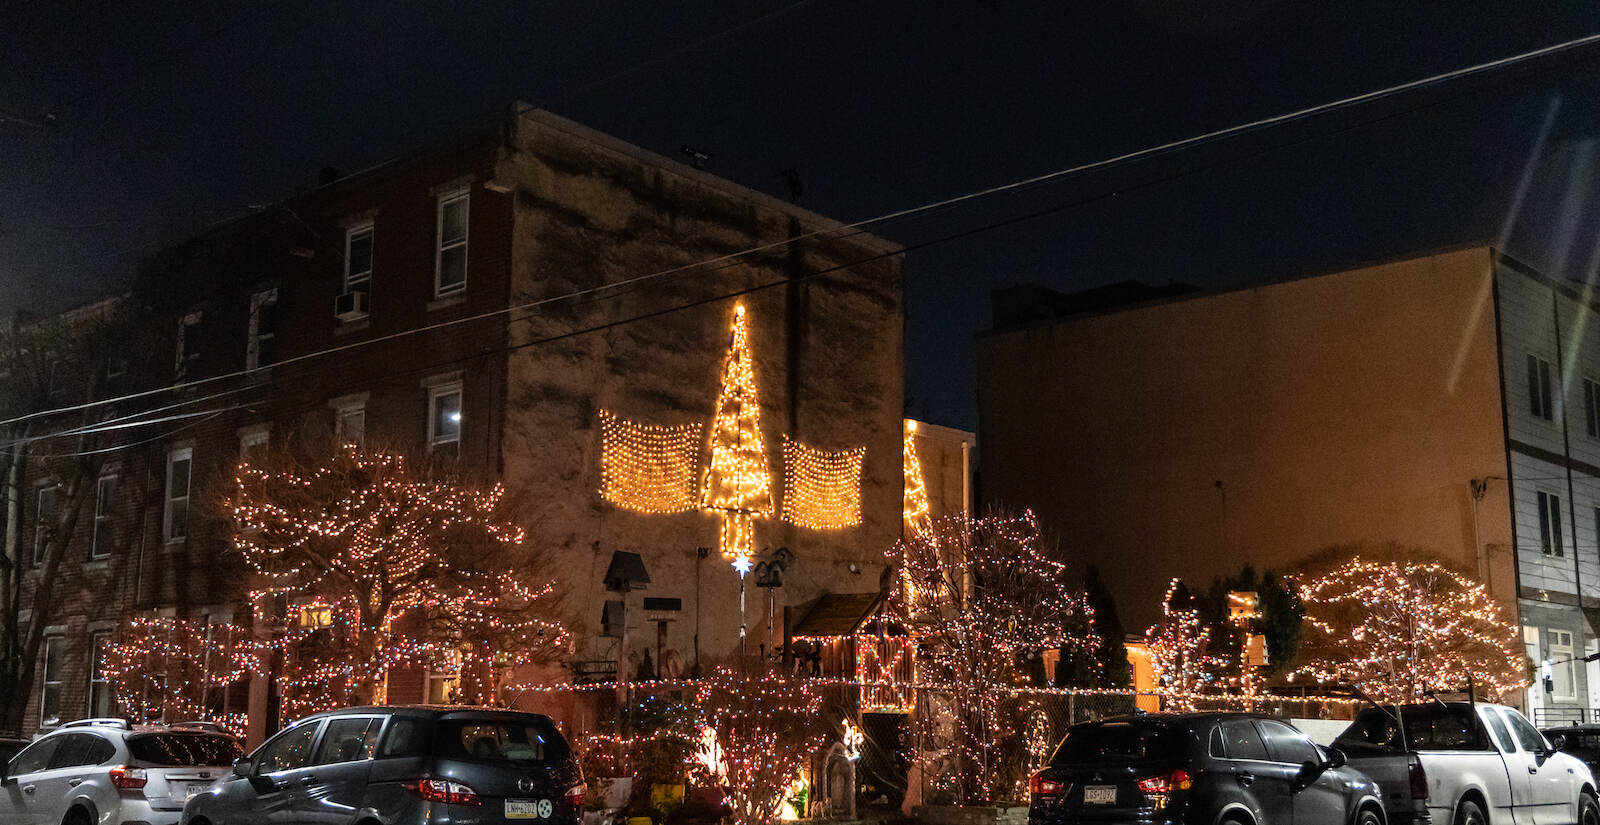 An East Kensington home is adorned with holiday lights